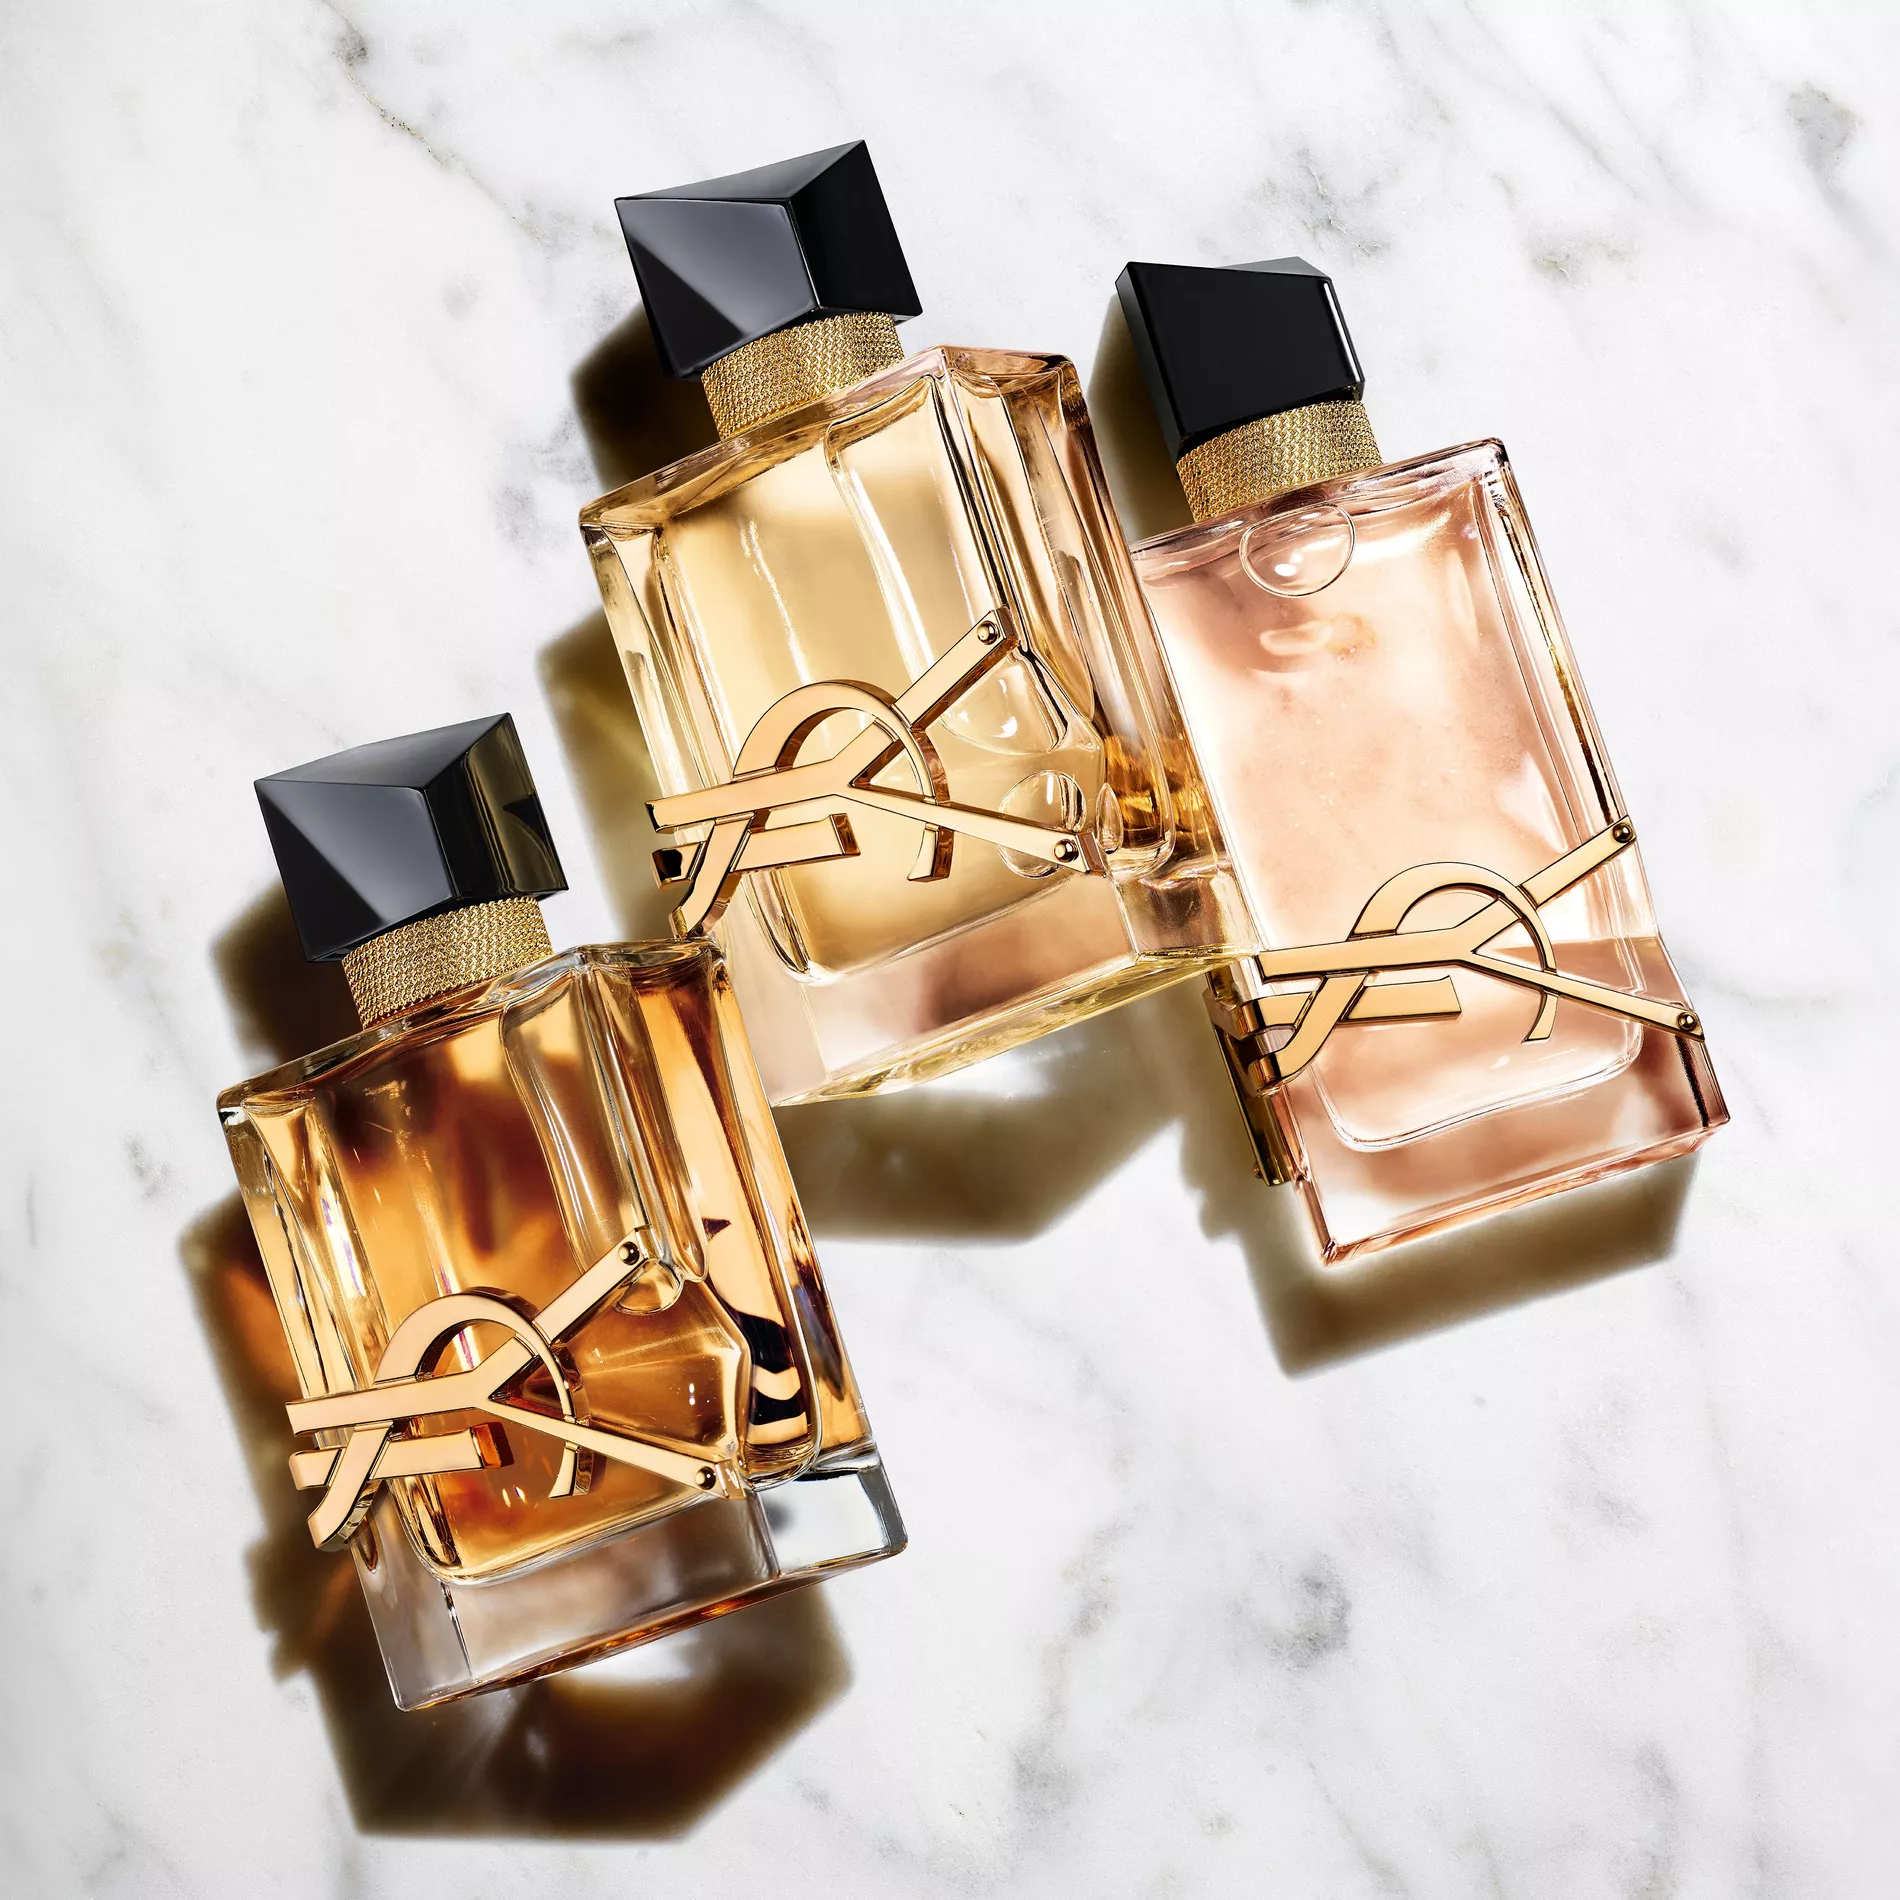 4 Striking Libre Perfumes From The YSL Collection